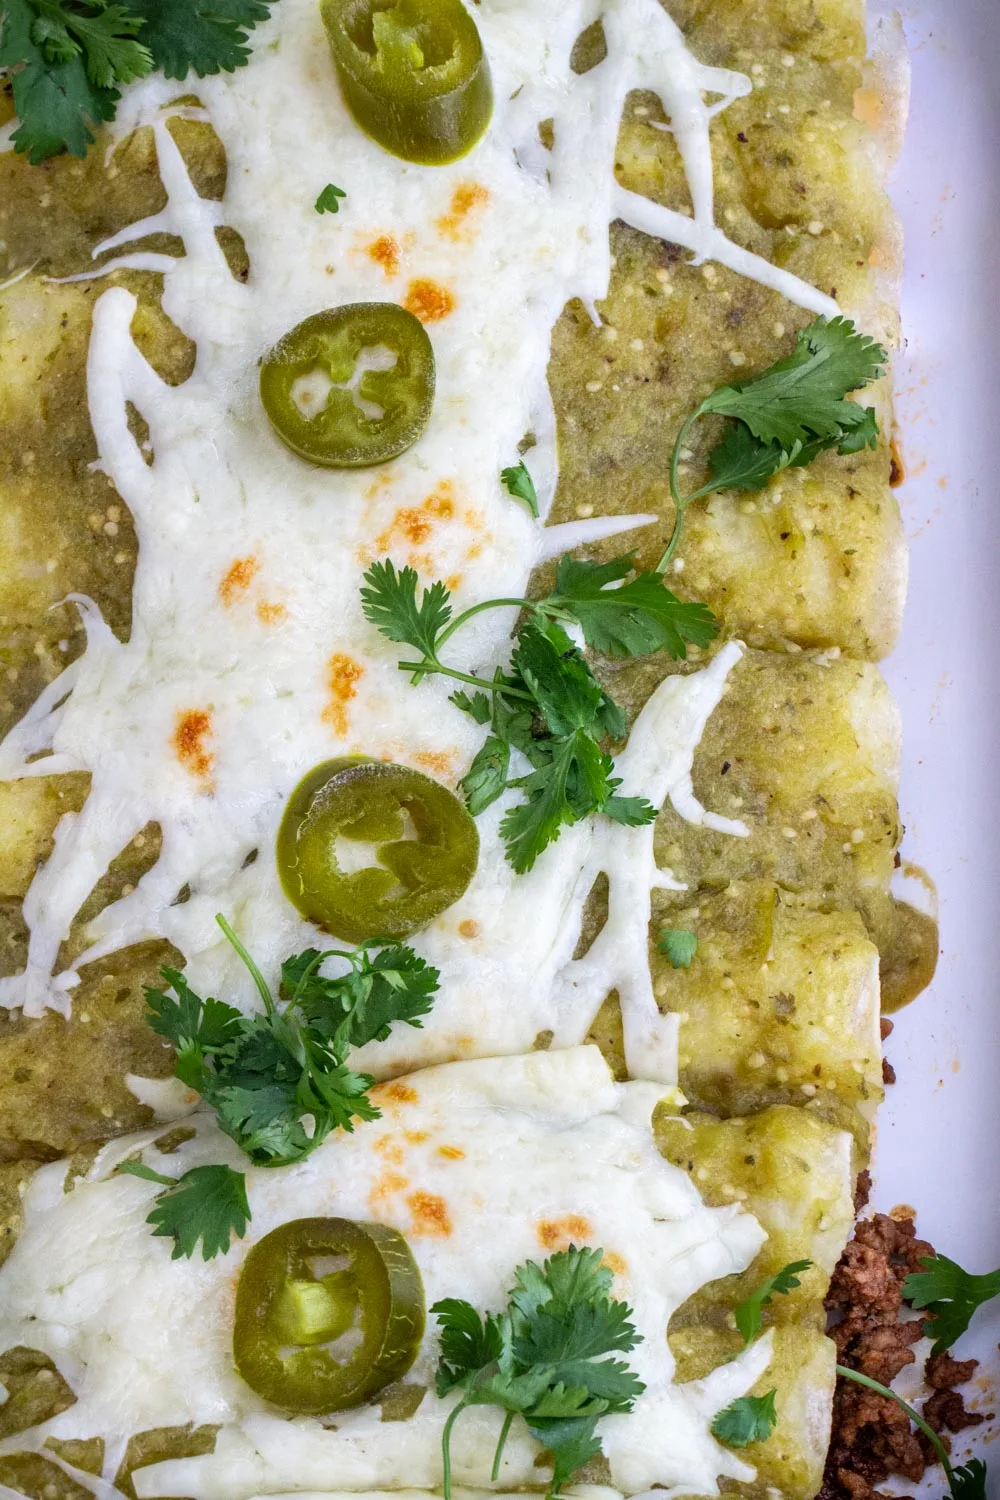 Ground beef enchiladas covered in green enchilada sauce, decorated with jalapenos and cilantro.